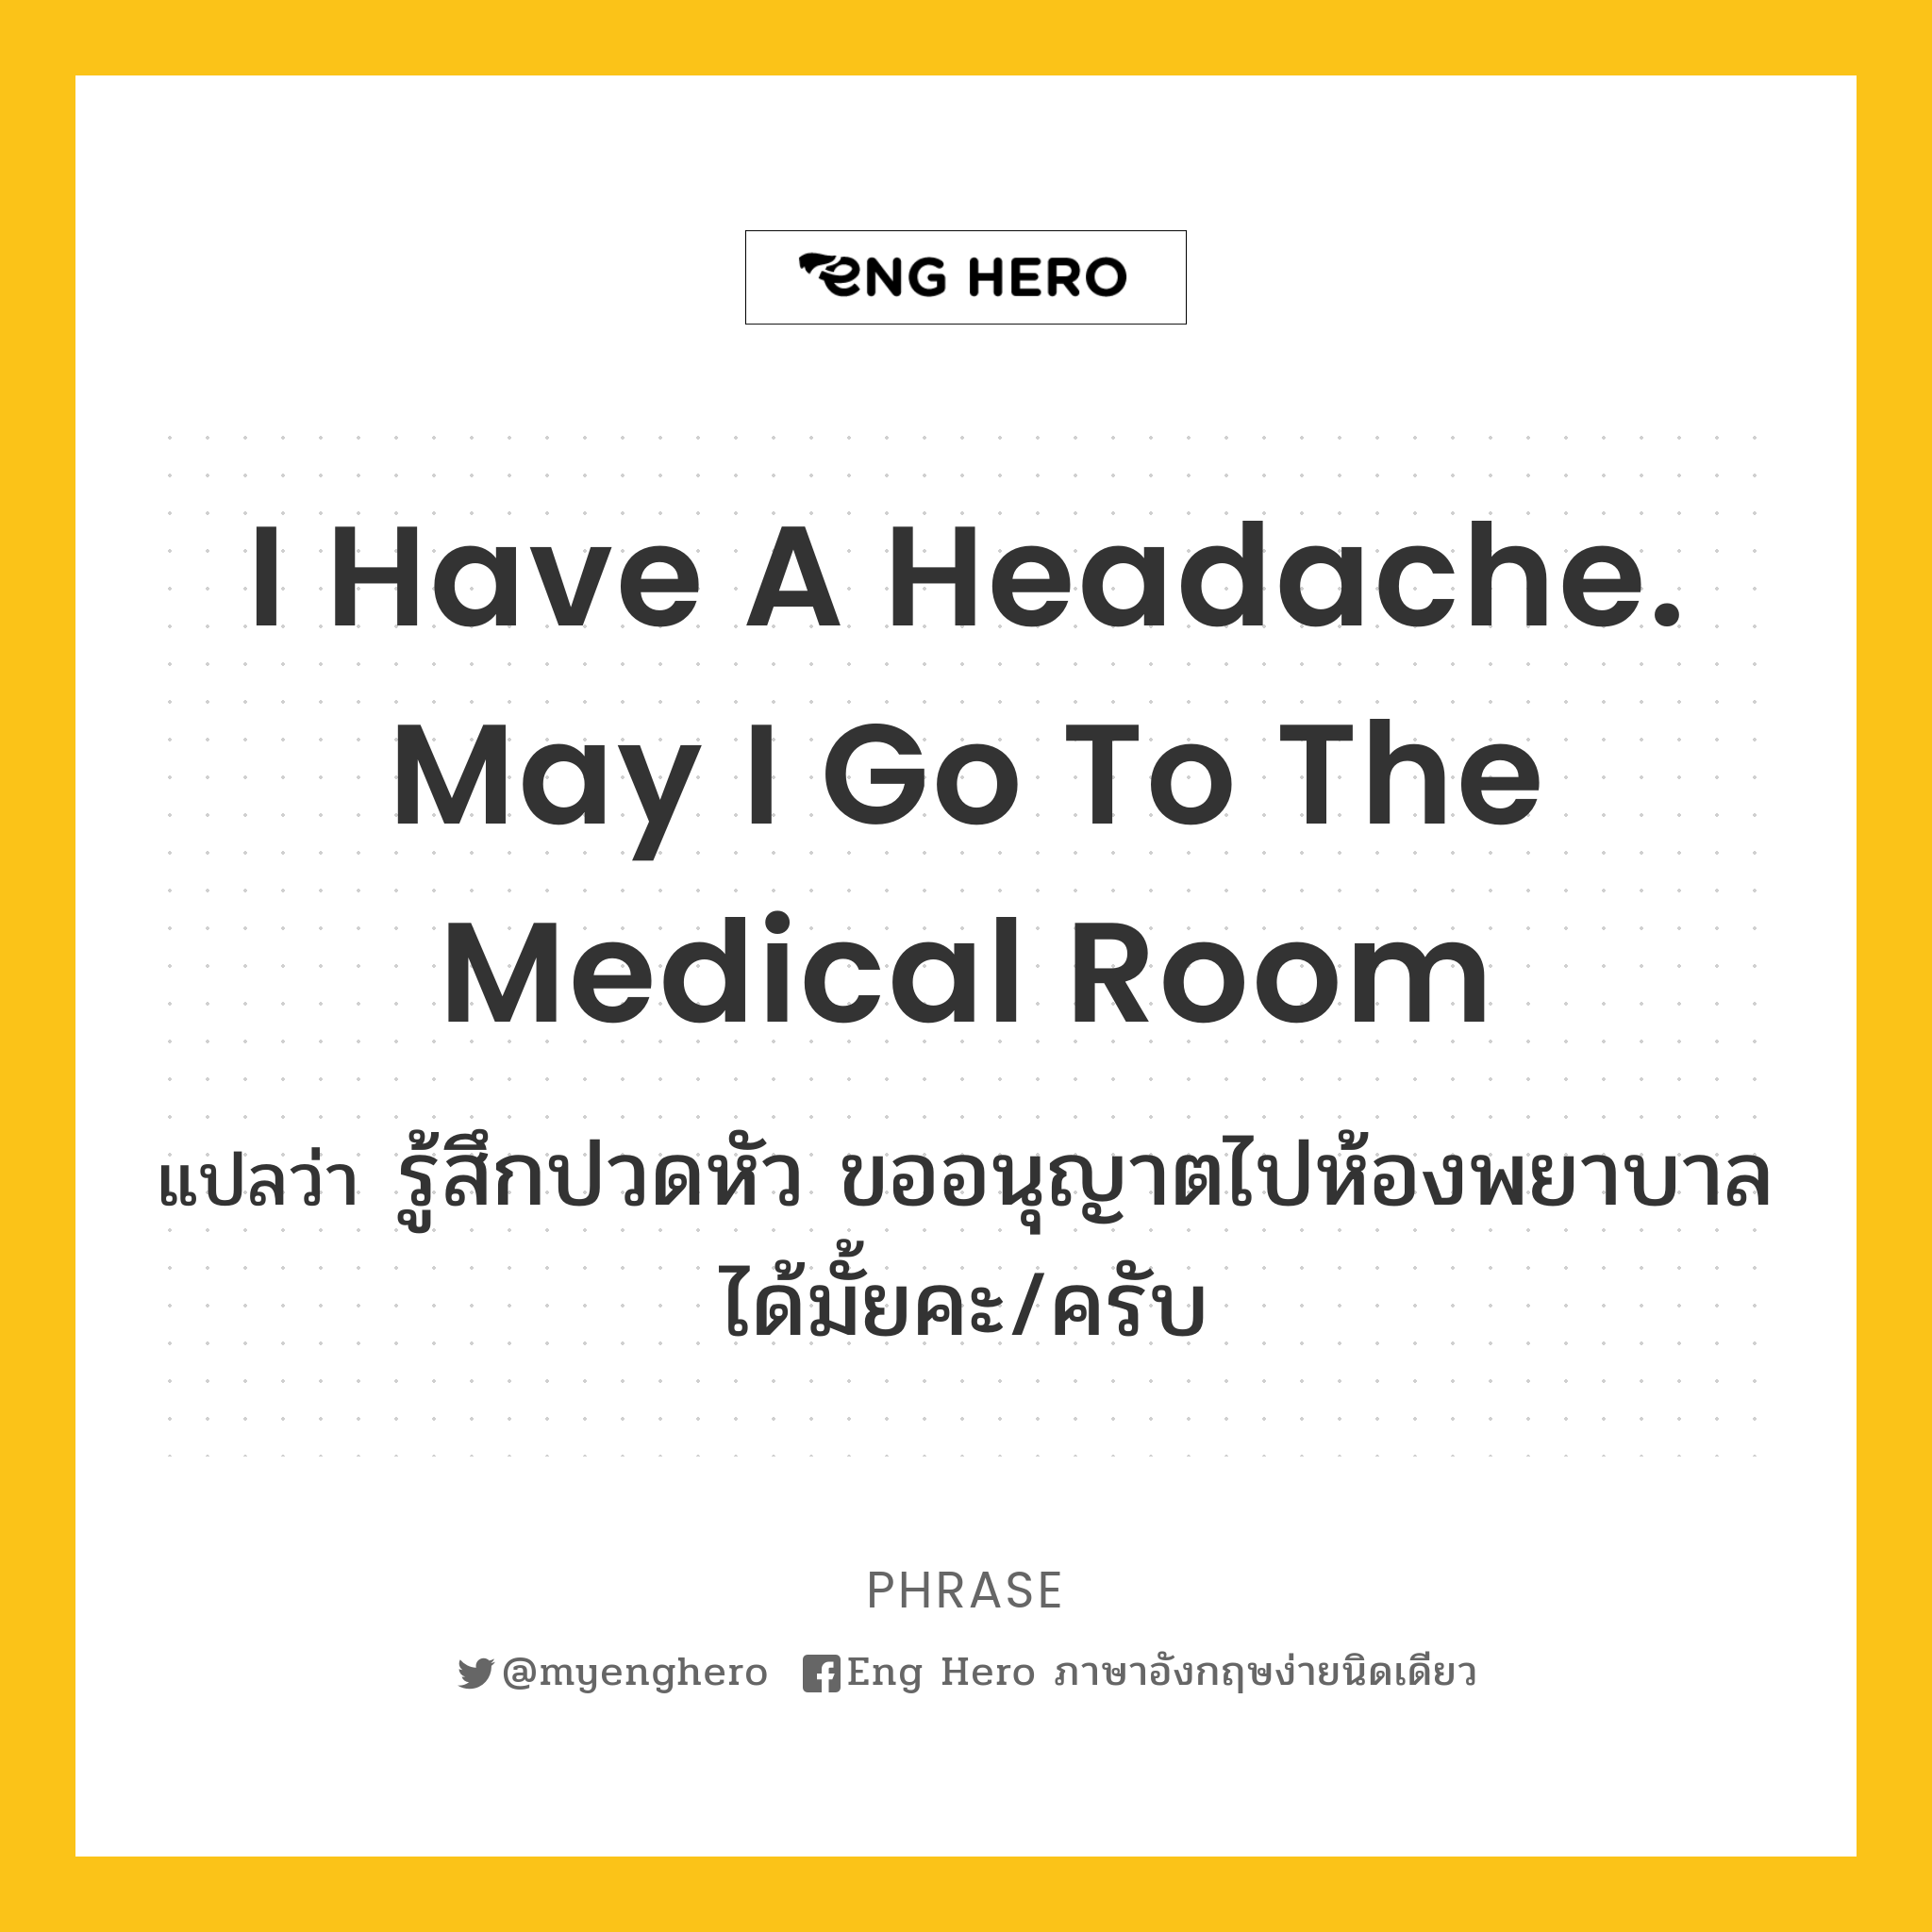 I have a headache. May I go to the medical room